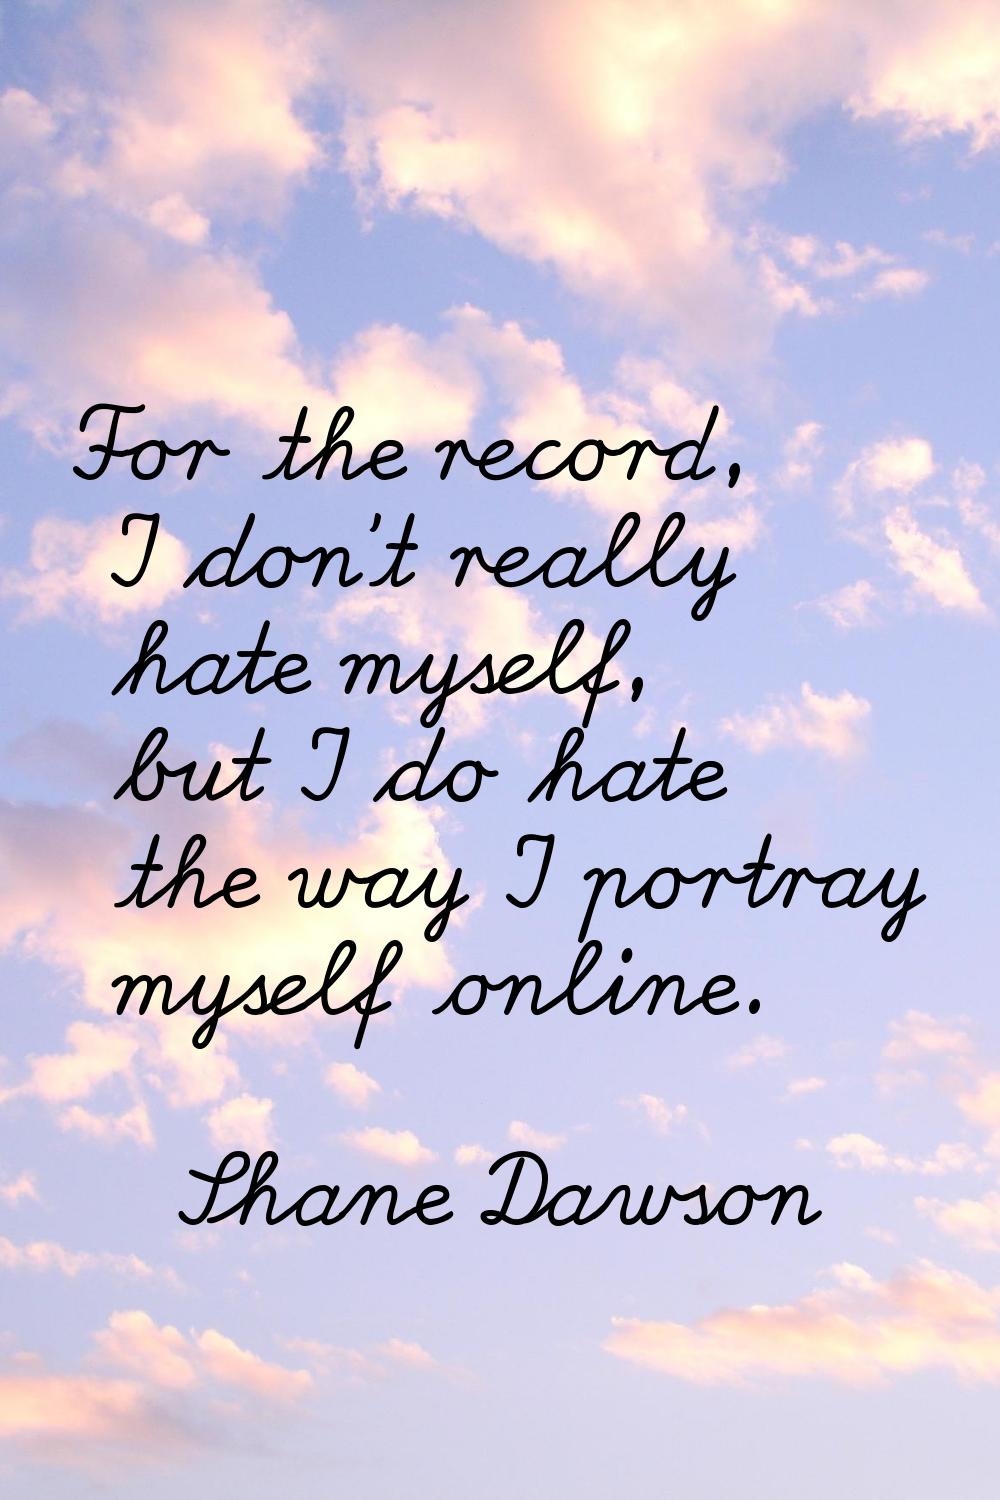 For the record, I don't really hate myself, but I do hate the way I portray myself online.